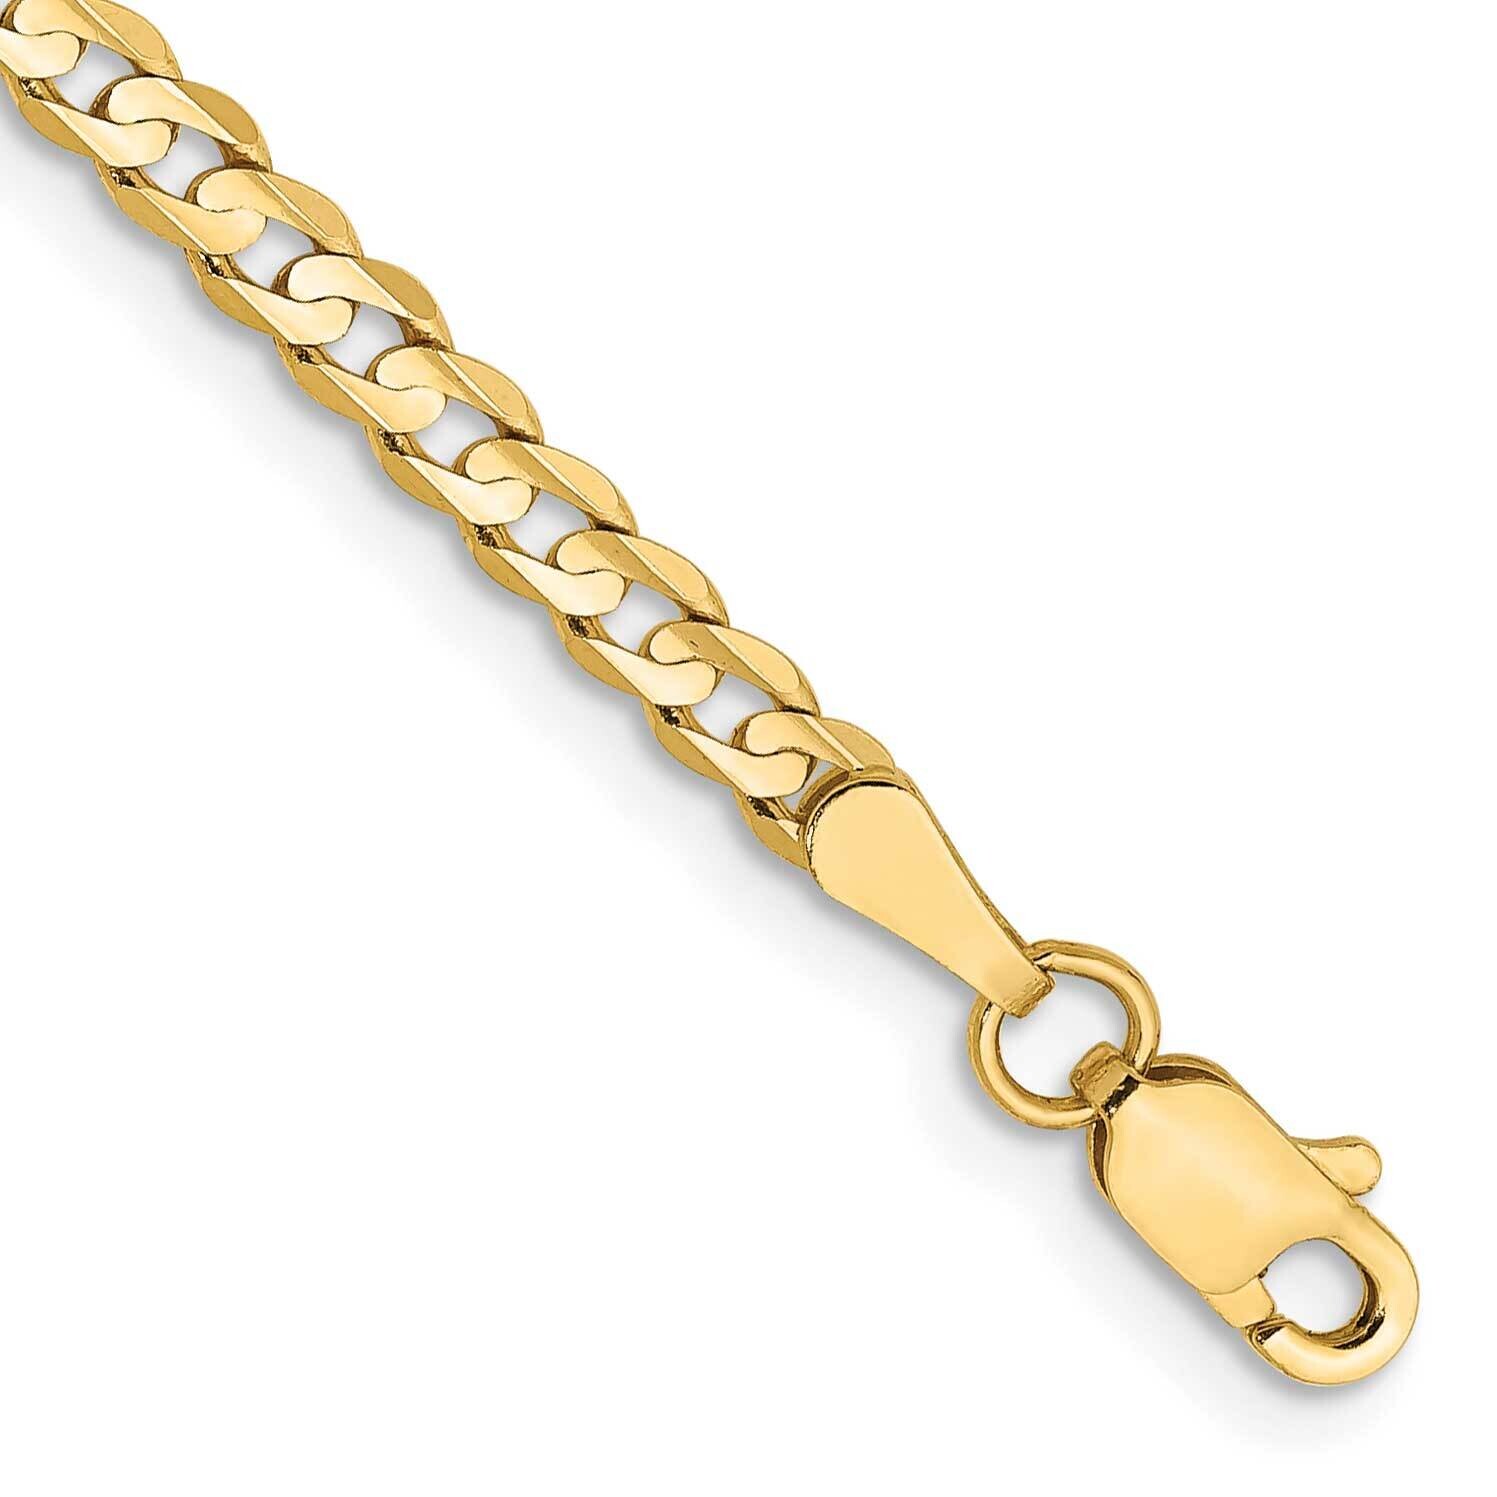 3mm Open Concave Curb Chain 7 Inch 10k Gold 10LCR080-7